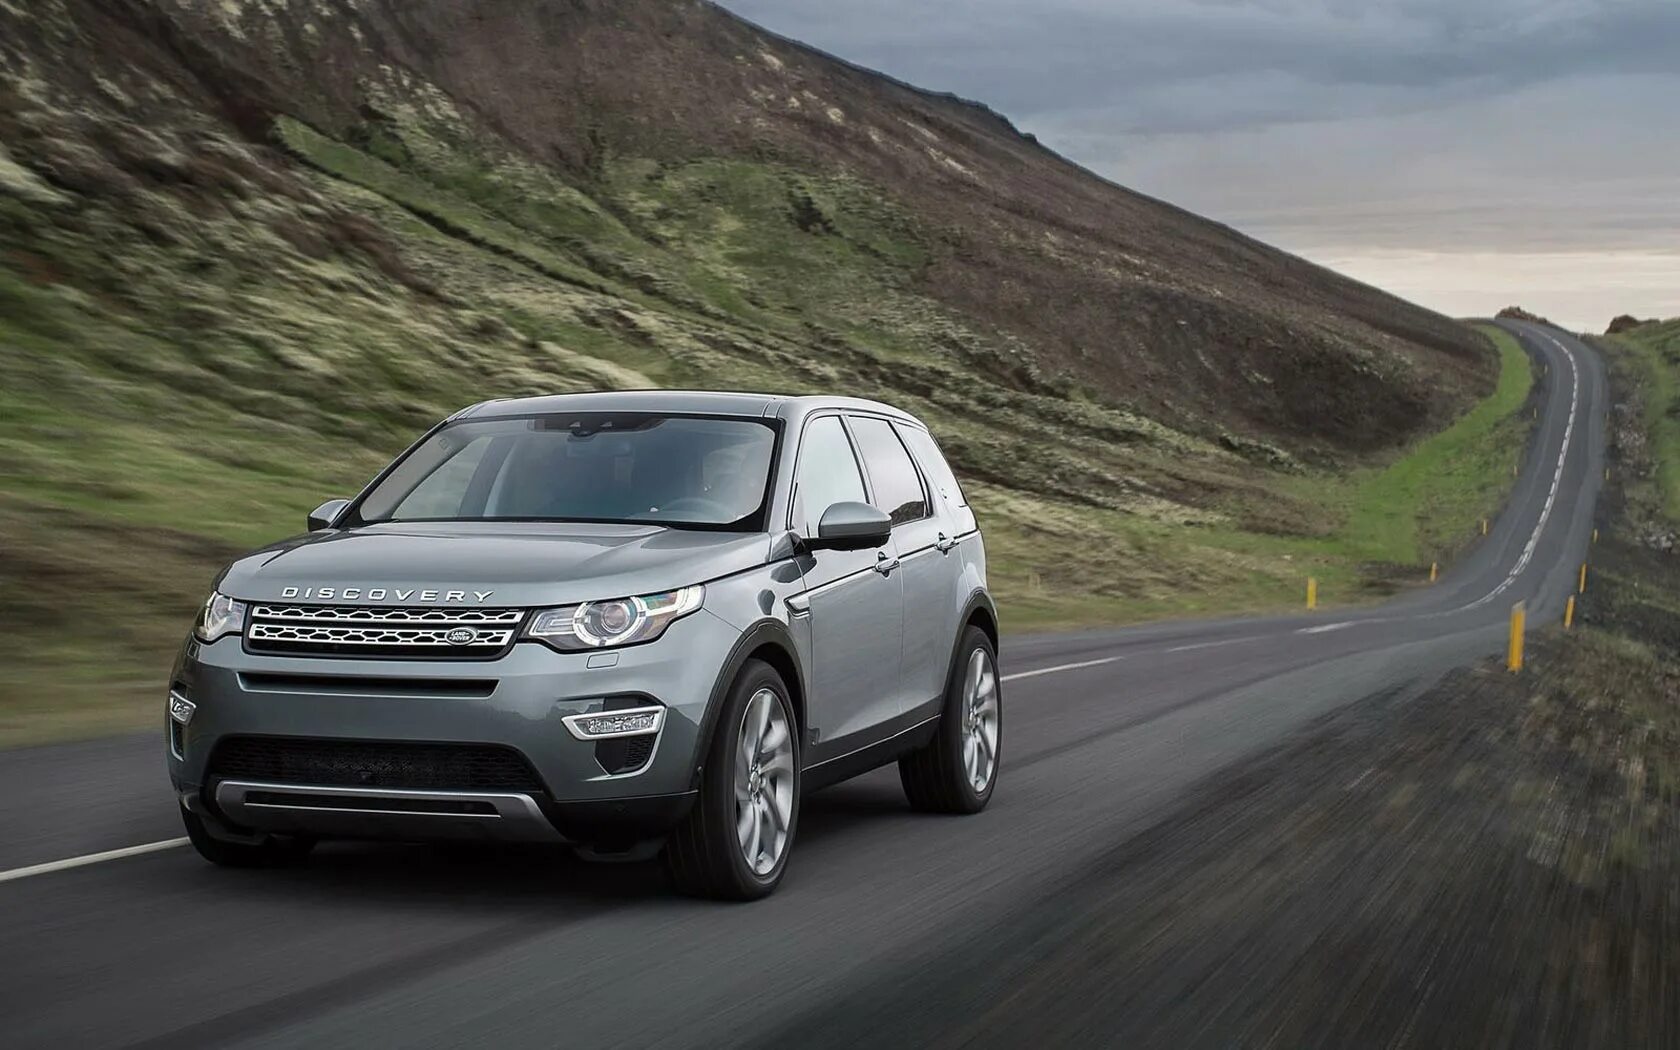 Land rover sport 2015. Land Rover Discovery Sport 2015. Ленд Ровер Дискавери спорт 2015. Ленд Ровер Дискавери 2015. Дискавери спорт 2022.